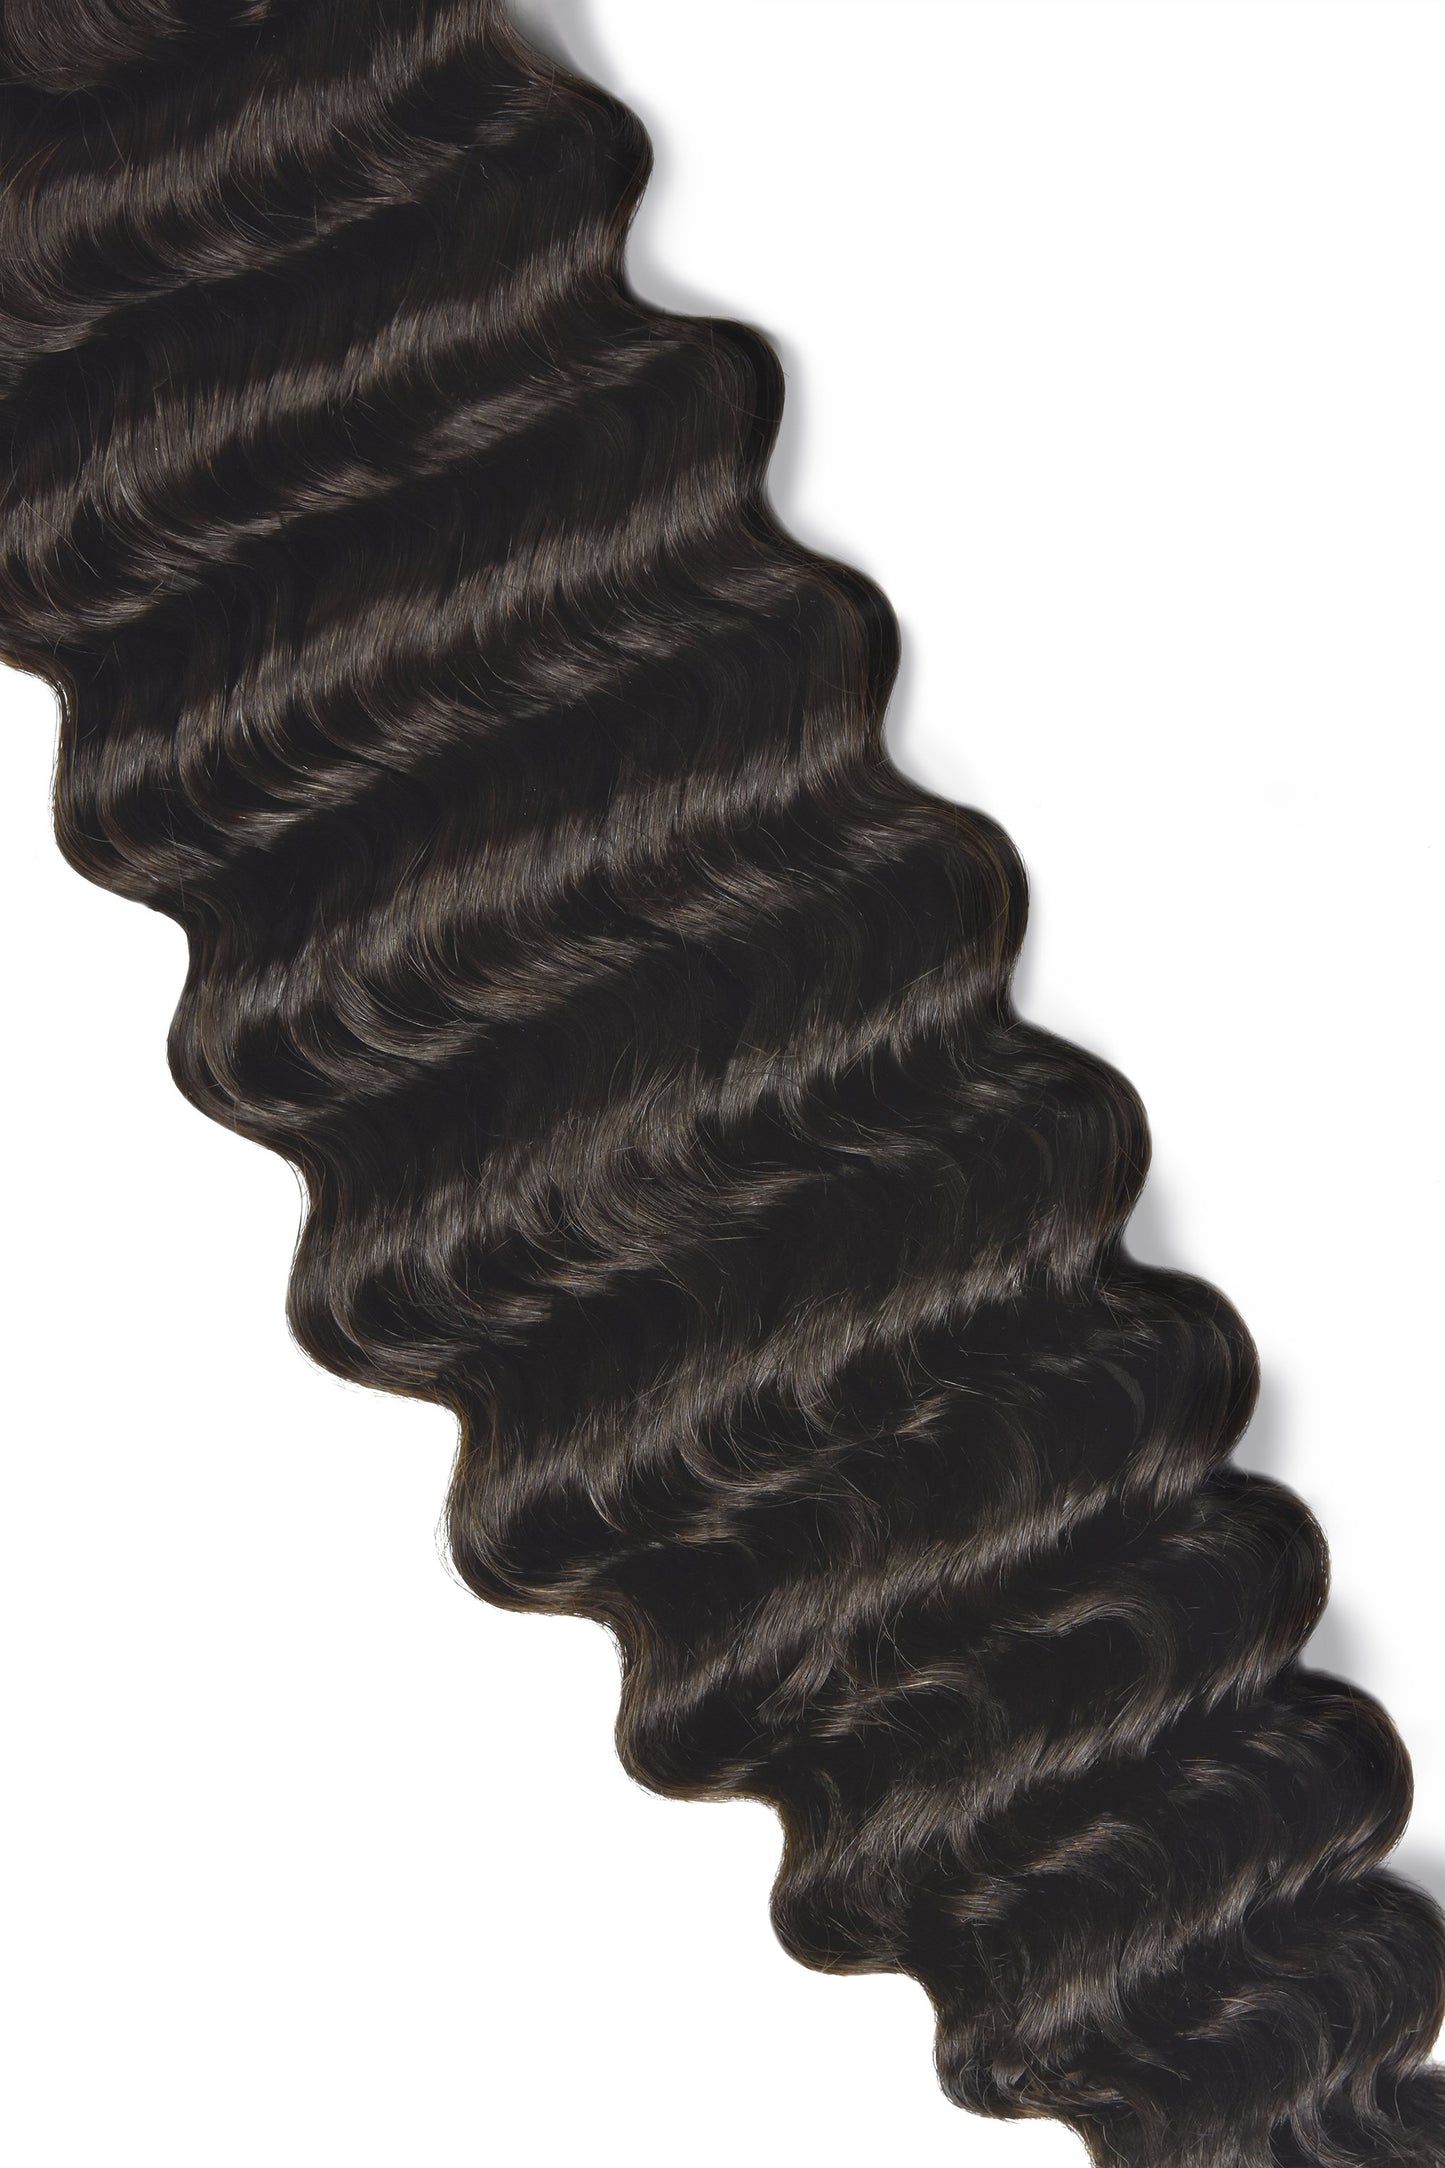 Curly type-c clip in hair extensions